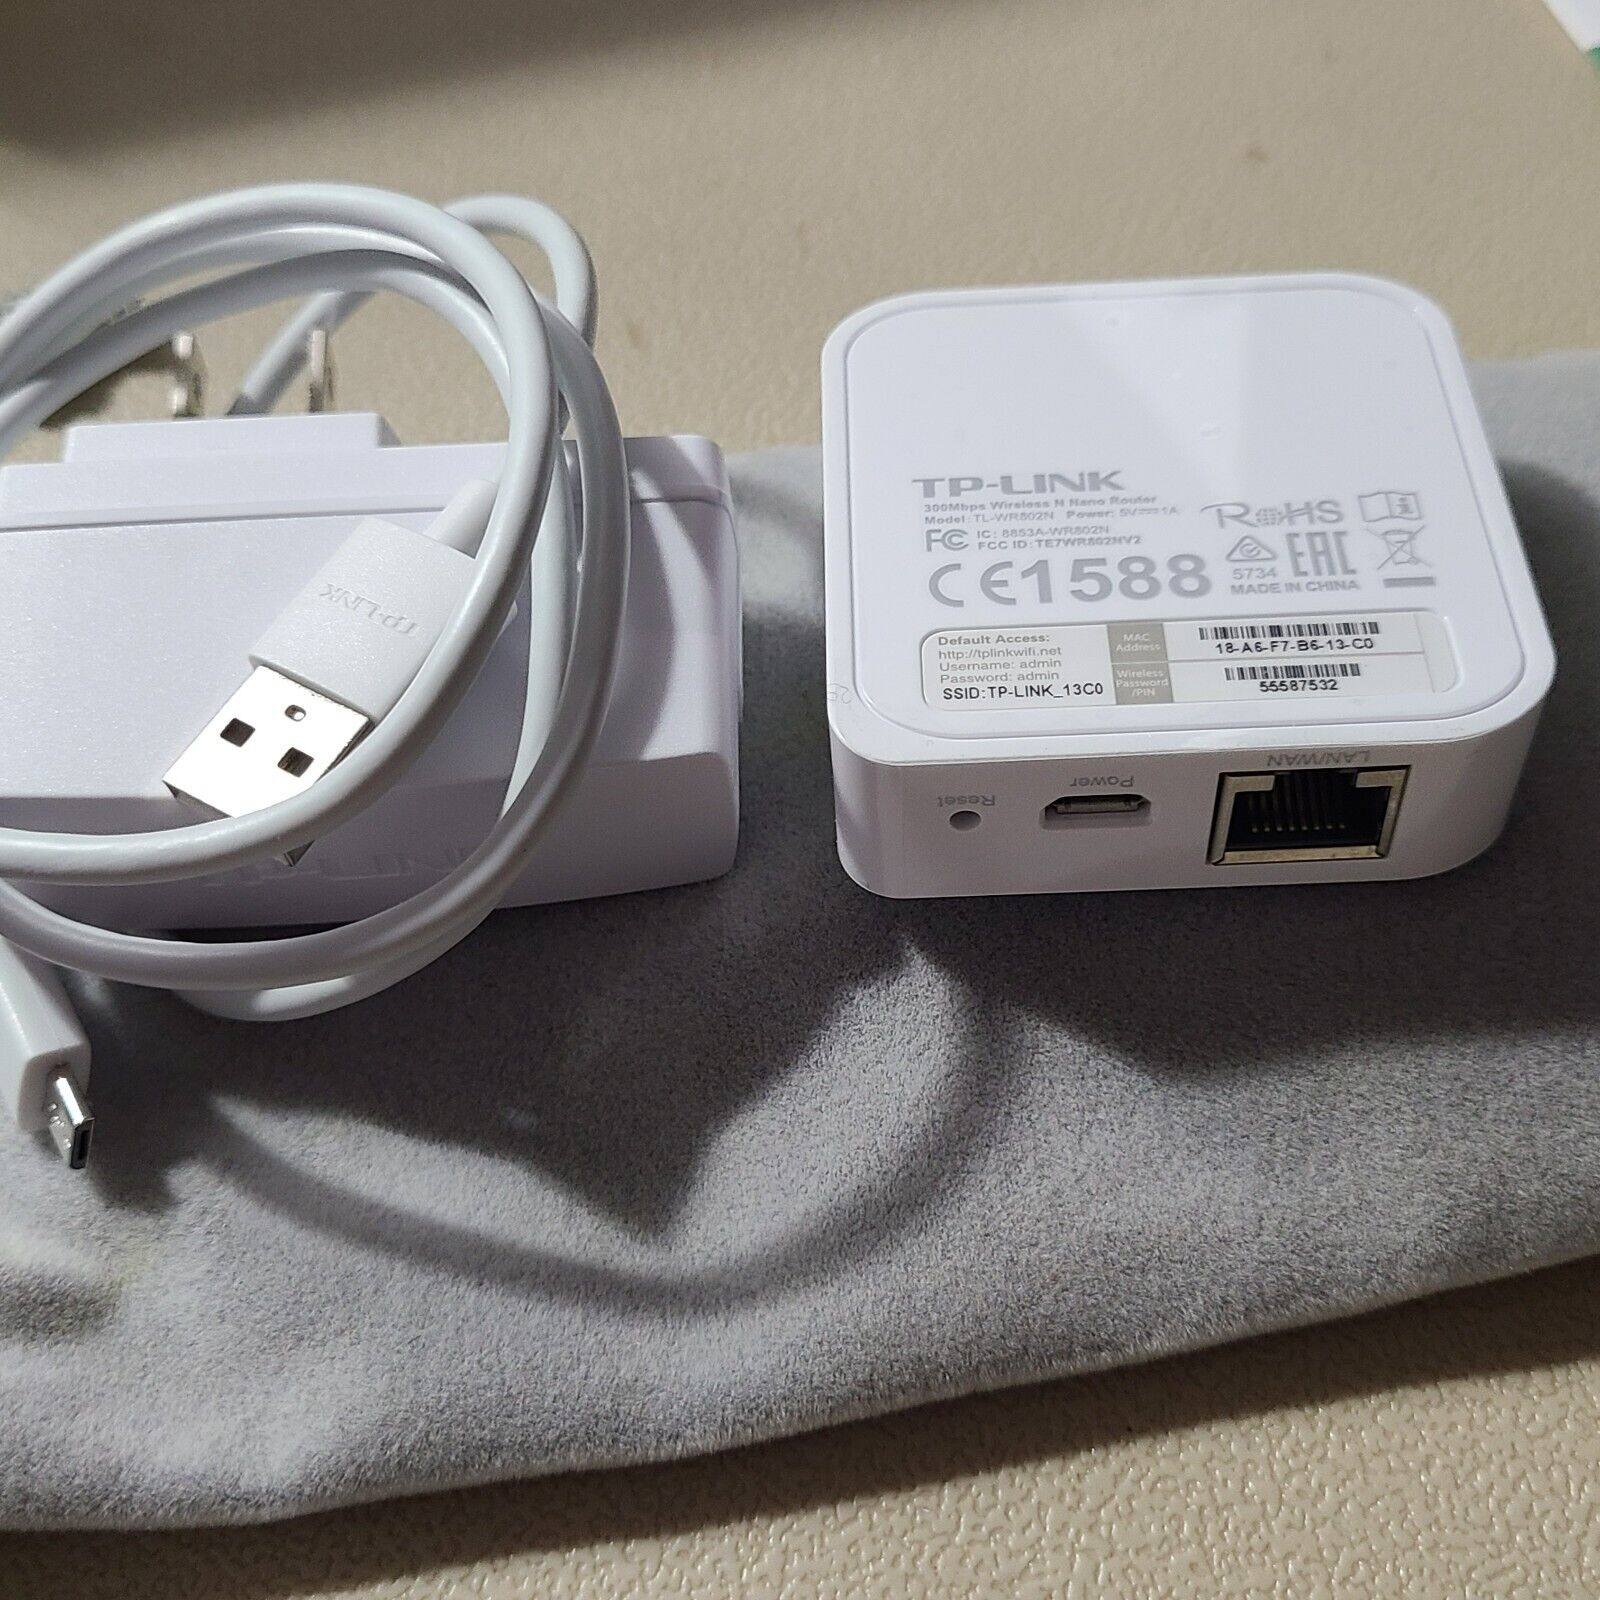 TP-Link travel hot spot. Great for connecting Wi-Fi devices to ethernet backend.